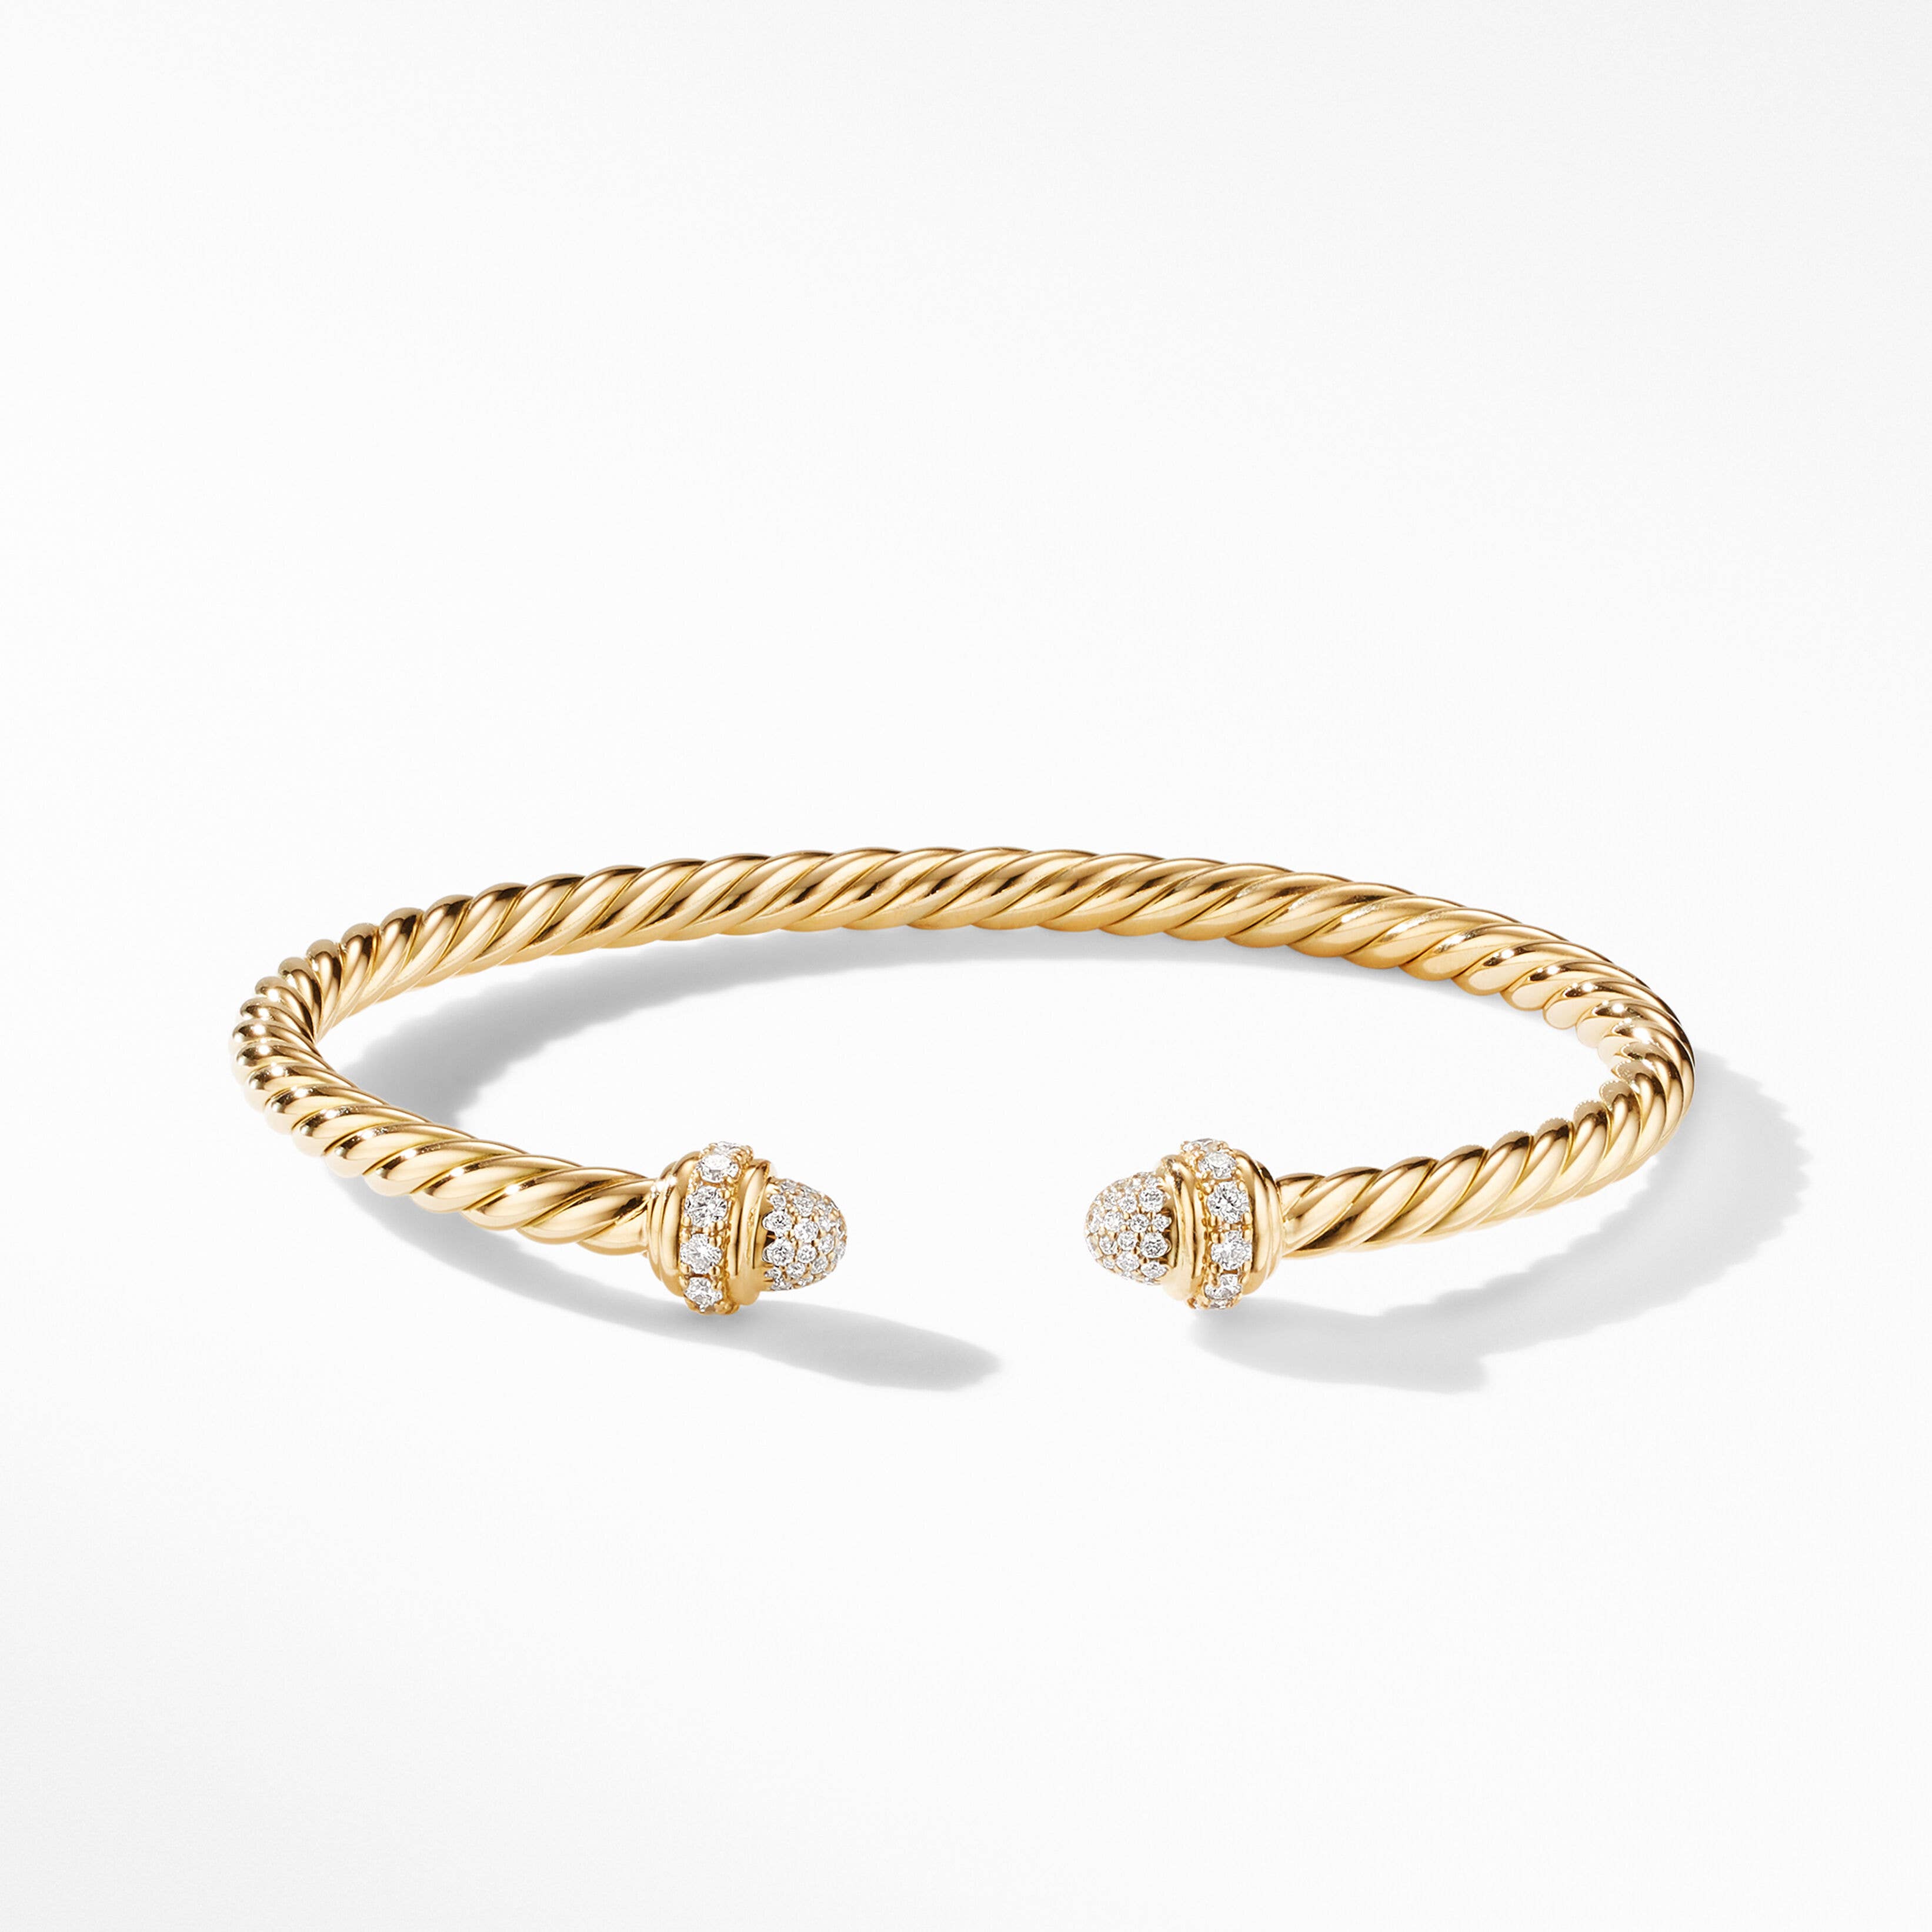 Cablespira Bracelet in 18K Yellow Gold with Pavé, 4mm